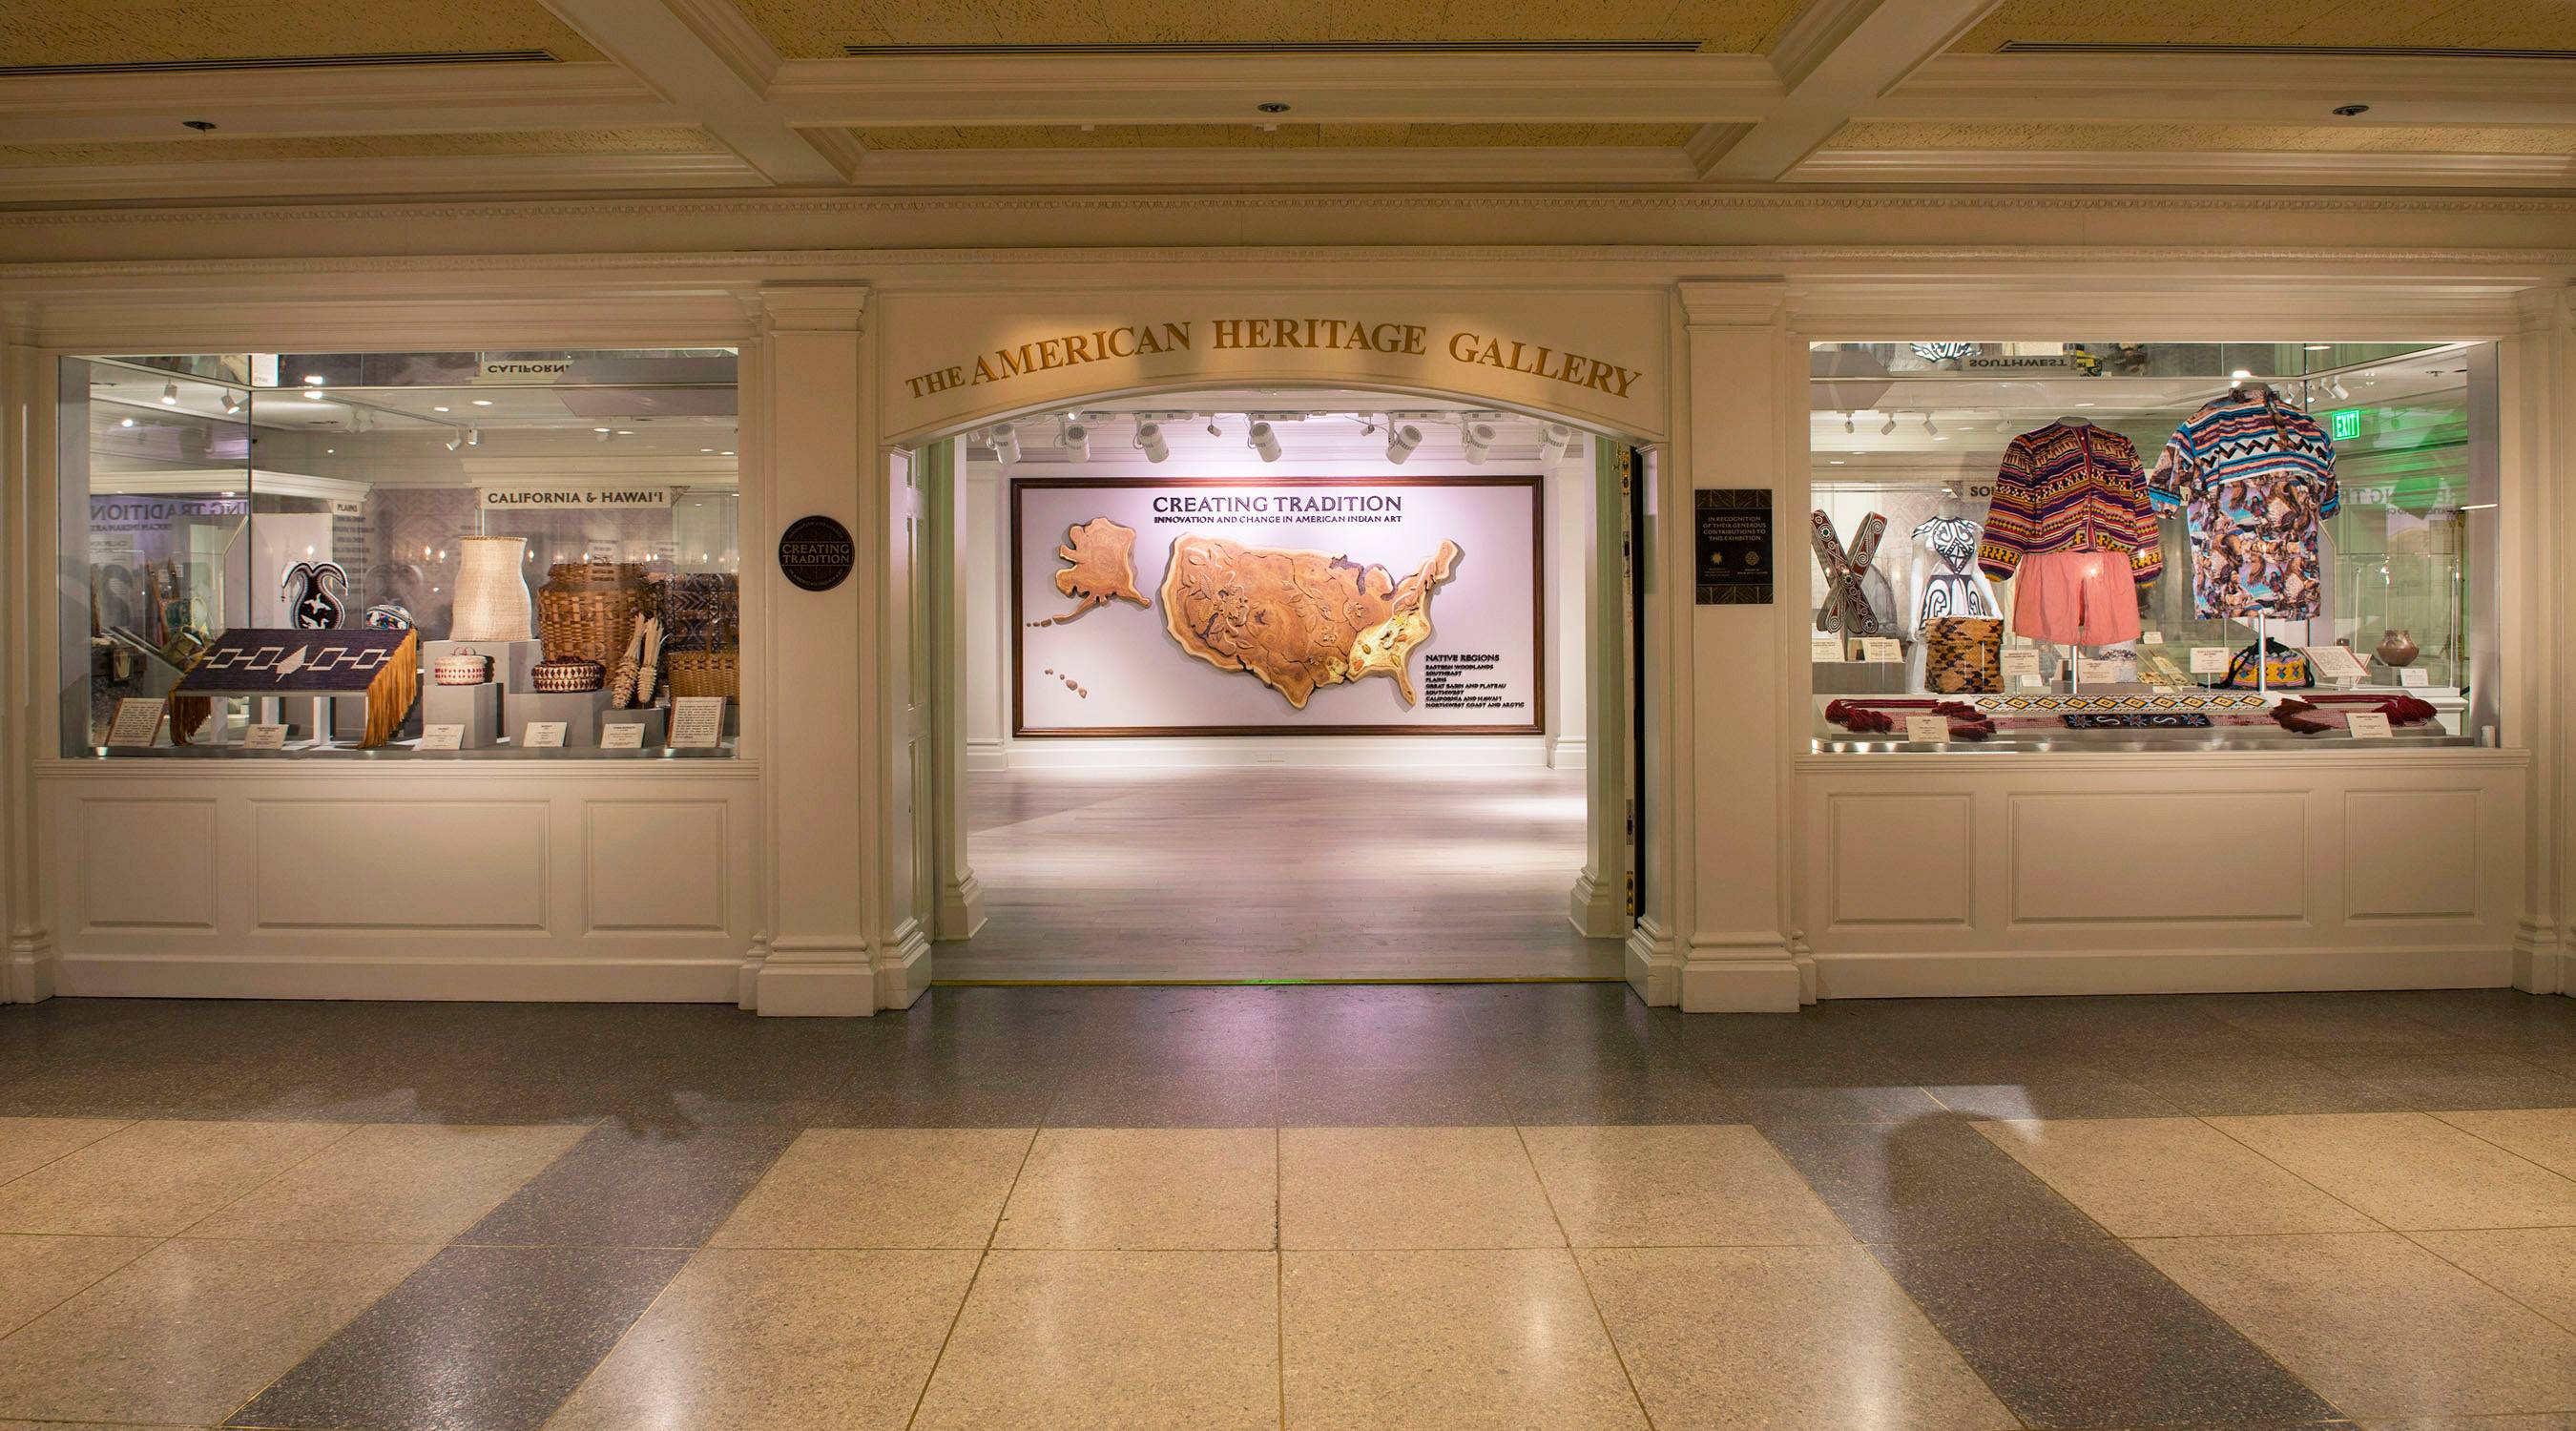 The American Heritage Gallery